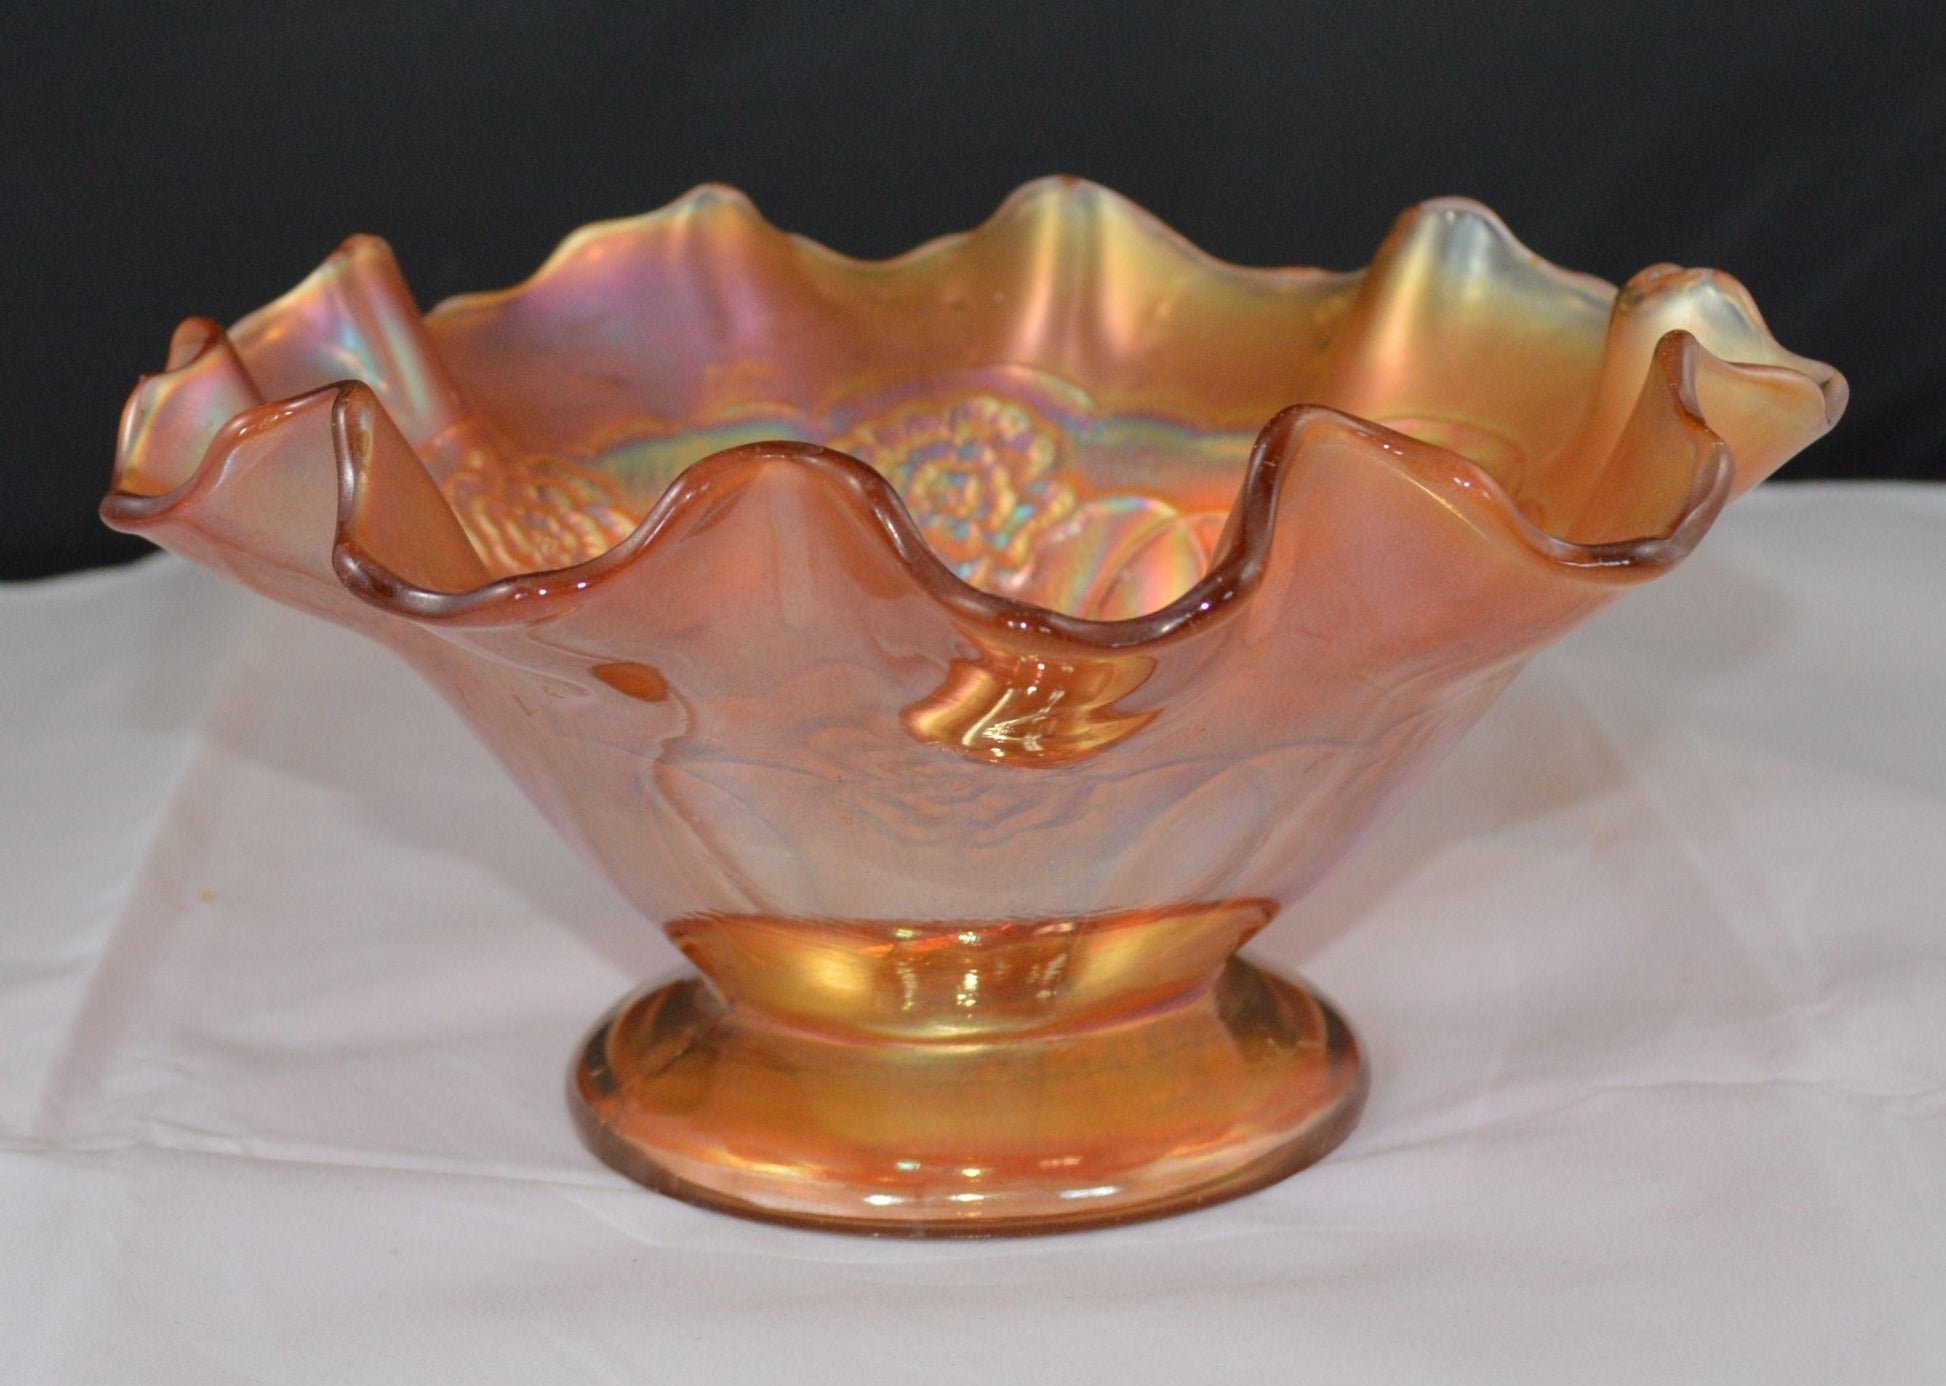 VINTAGE CARNIVAL GLASS BOWL WITH FLORAL PATTERN(PREVIOUSLY OWNED)FAIRLY GOOD CONDITION - TMD167207